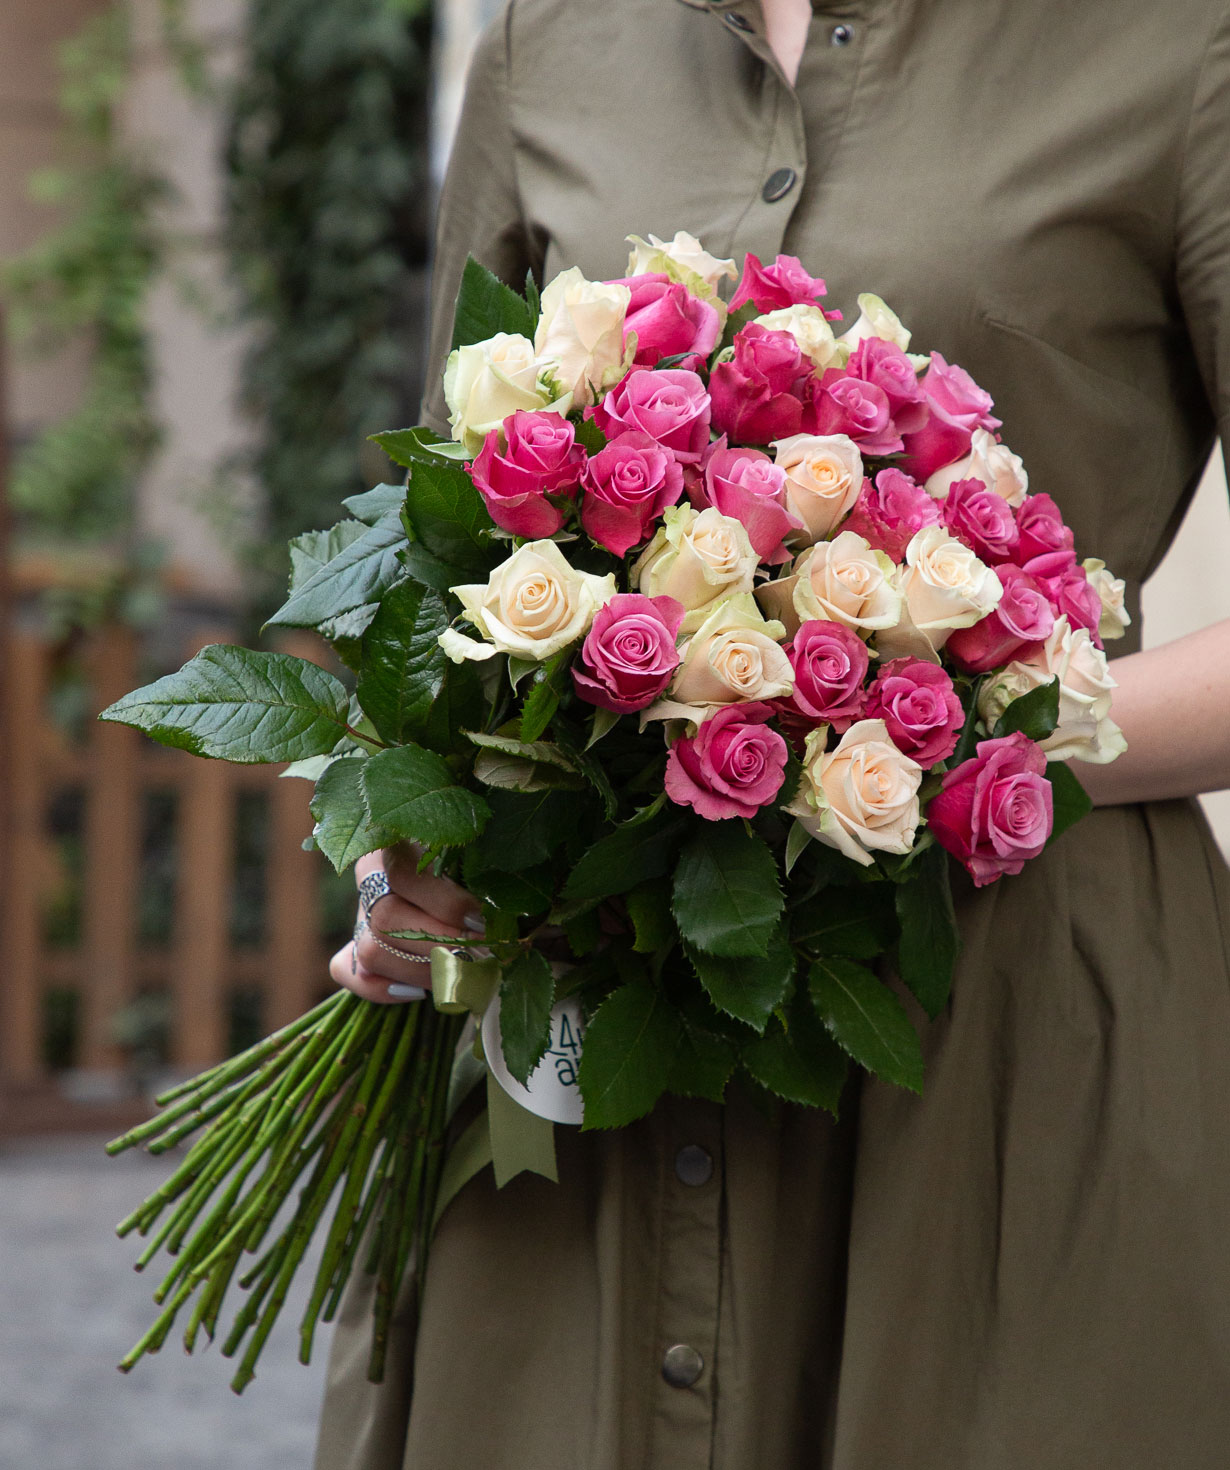 Bouquet `Ludbreg` with roses